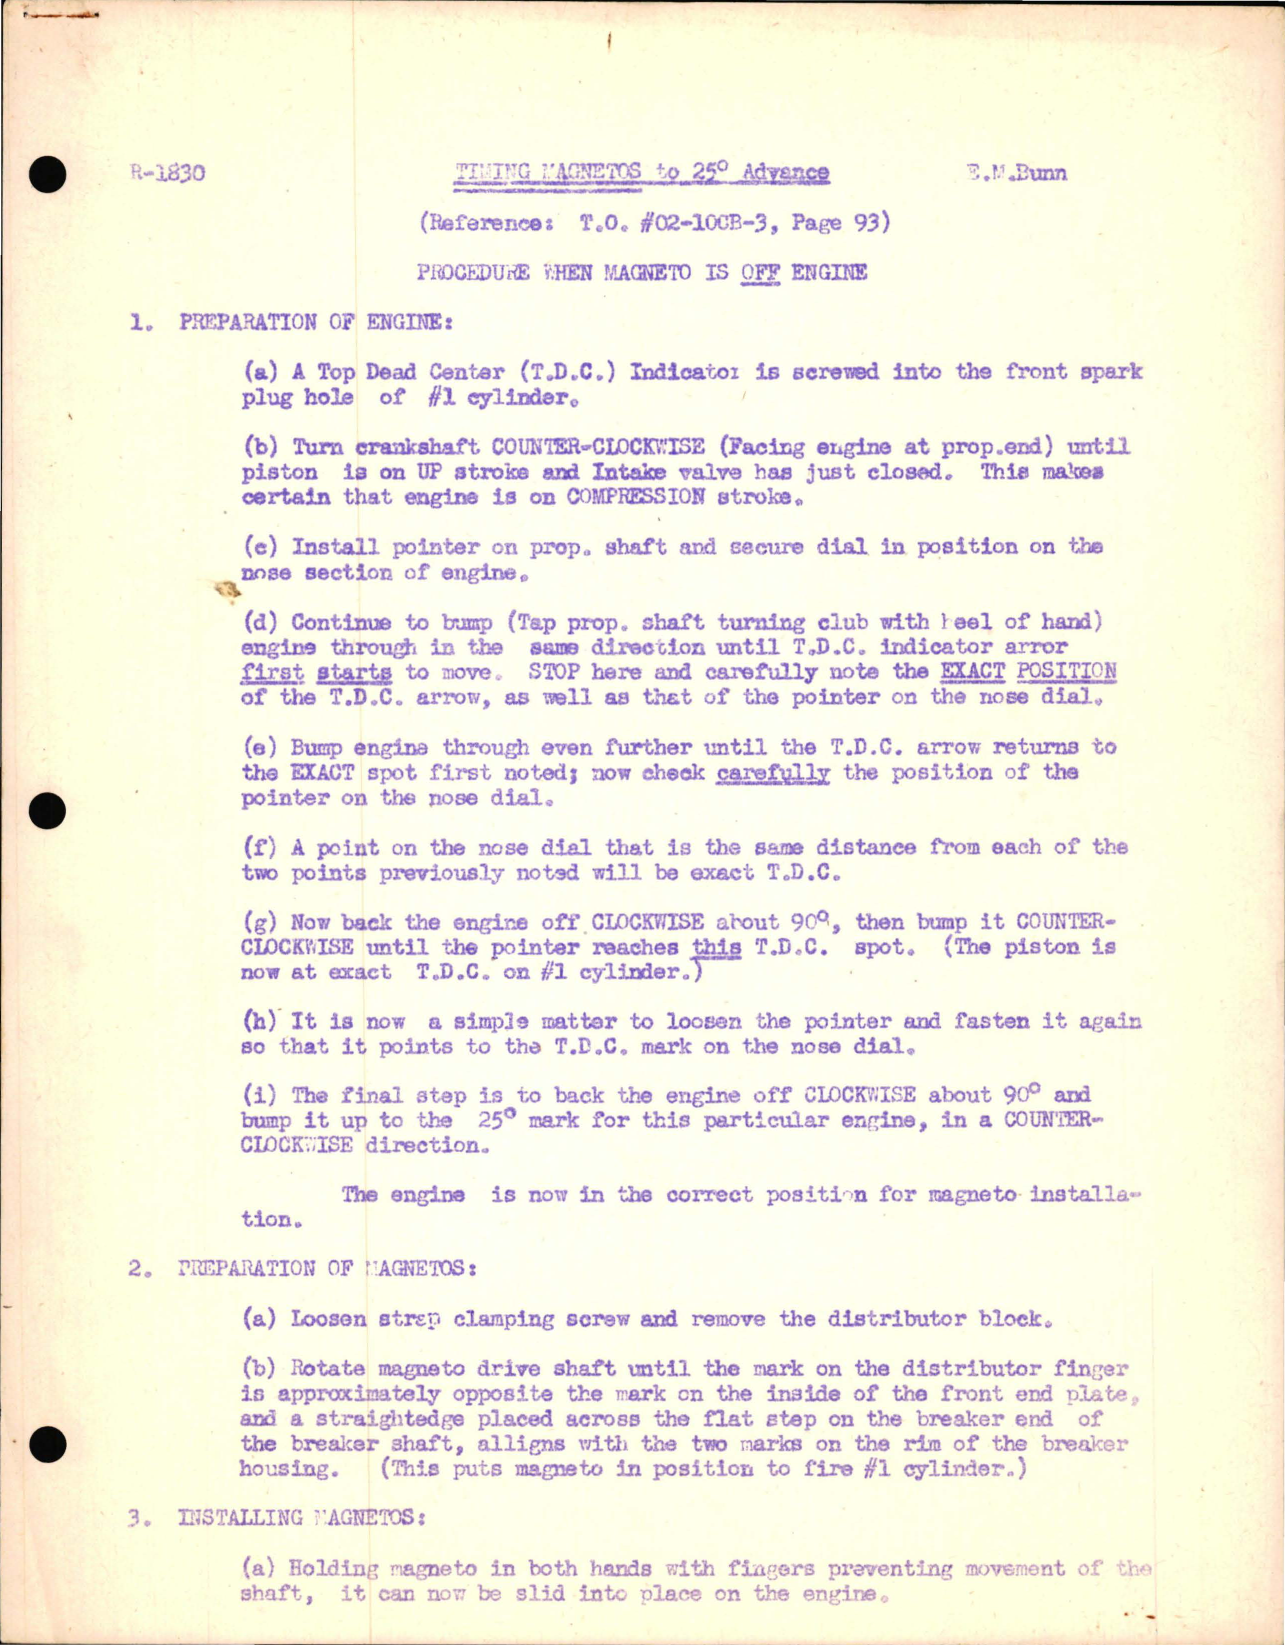 Sample page 1 from AirCorps Library document: Timing Magnetos to 25 Degree Advance for R-1830